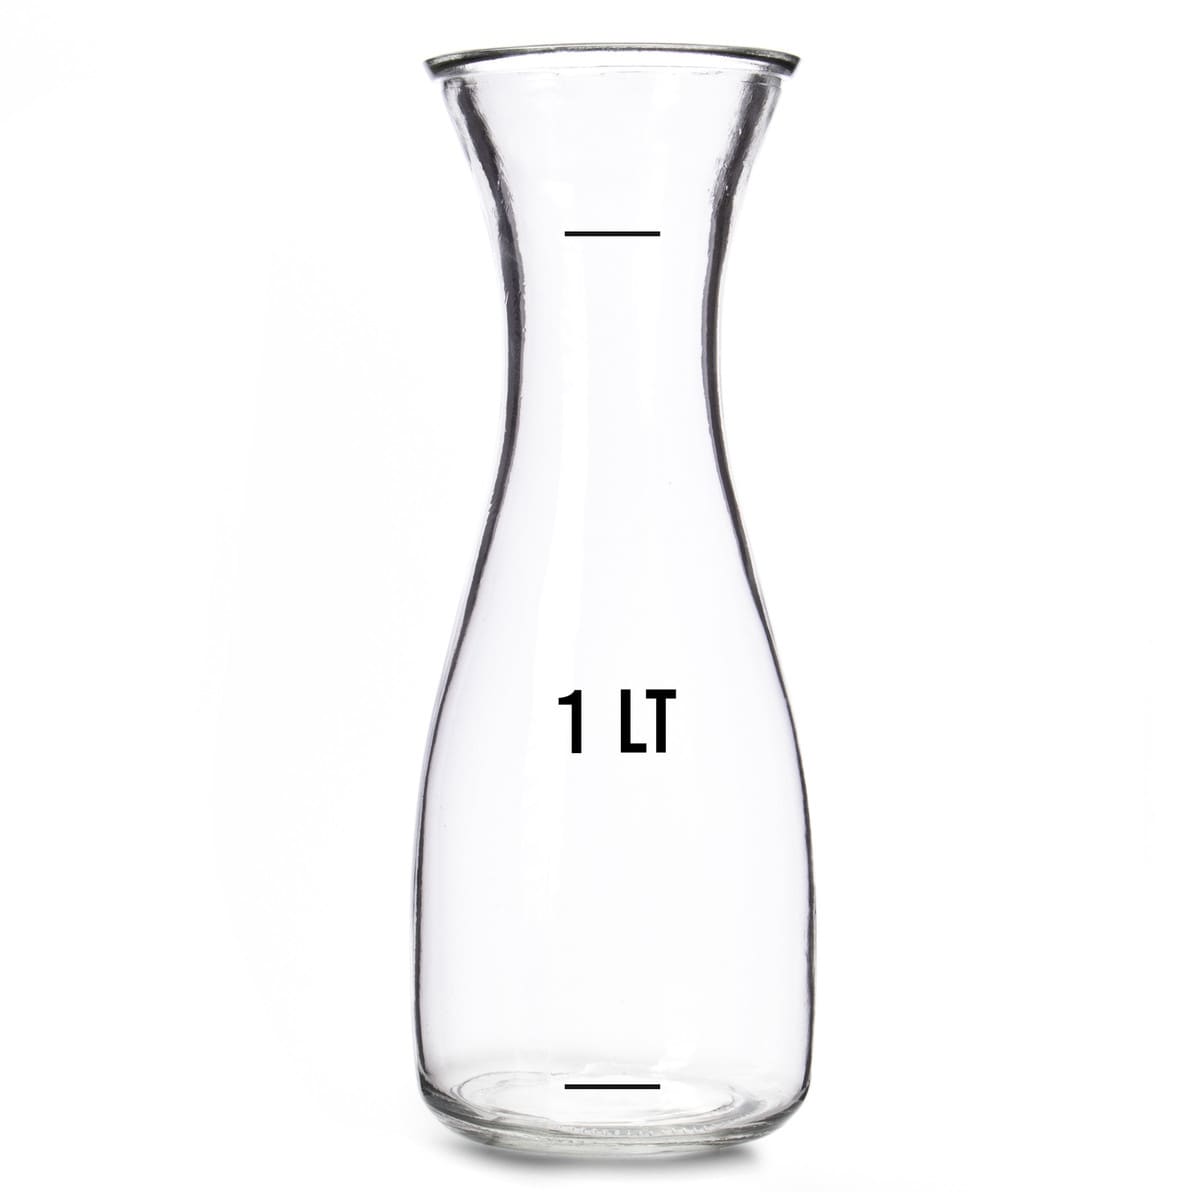 https://ak1.ostkcdn.com/images/products/is/images/direct/6ebf57ef93f99ef6b29ca4fc9c9132b9f929f349/12-oz.-%28350mL%29-Glass-Beverage-Carafe.jpg